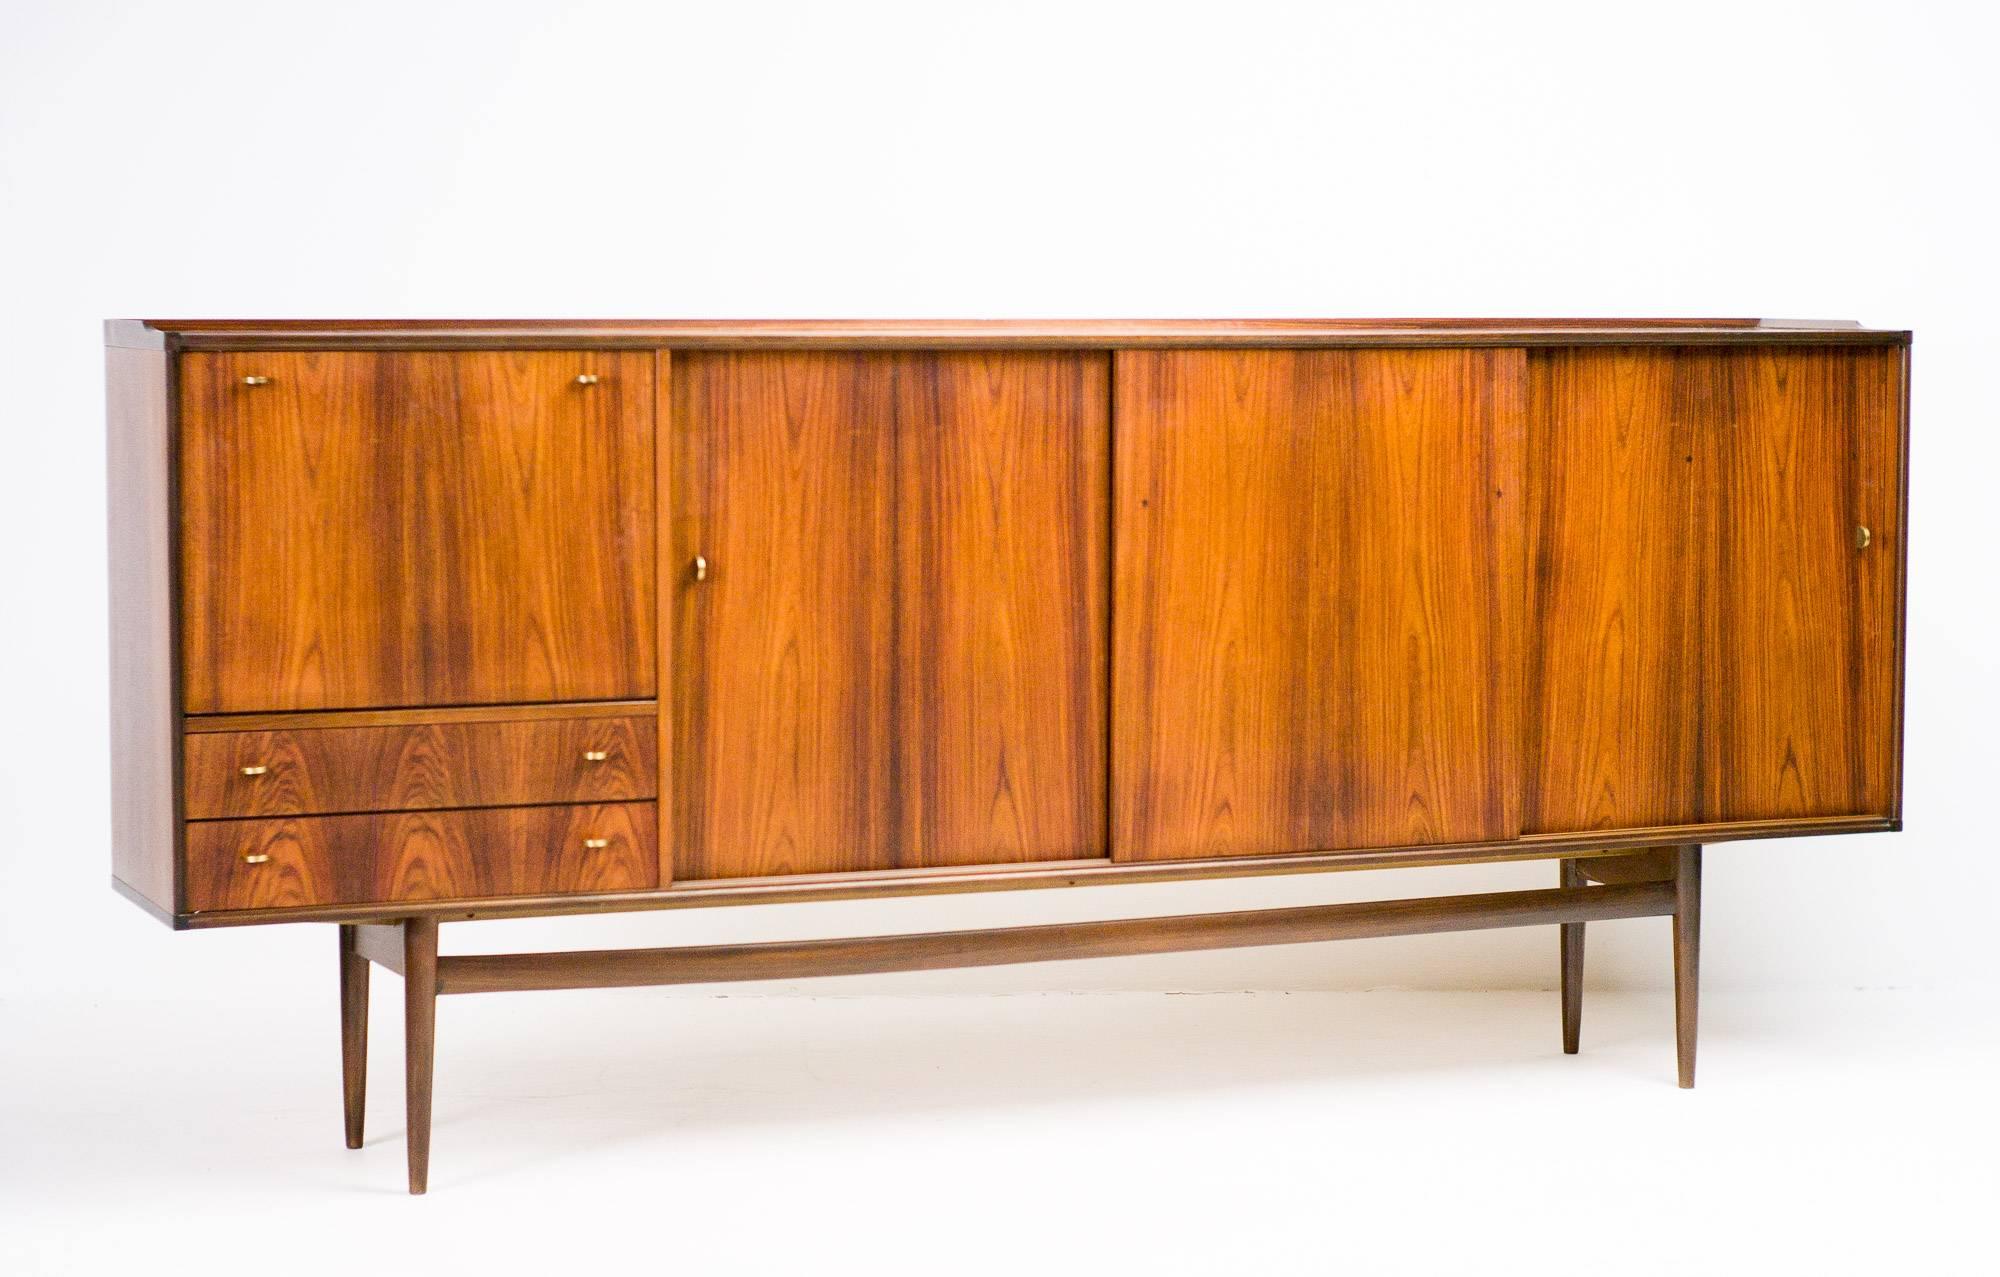 Excellent rosewood credenza made in 1960 by Fristho, Netherlands.
Exquisite details such as refined solid brass handles and Carrara marble shelves in the bar compartment. Rosewood outside, birch veneer inside.
Unrestored excellent original vintage